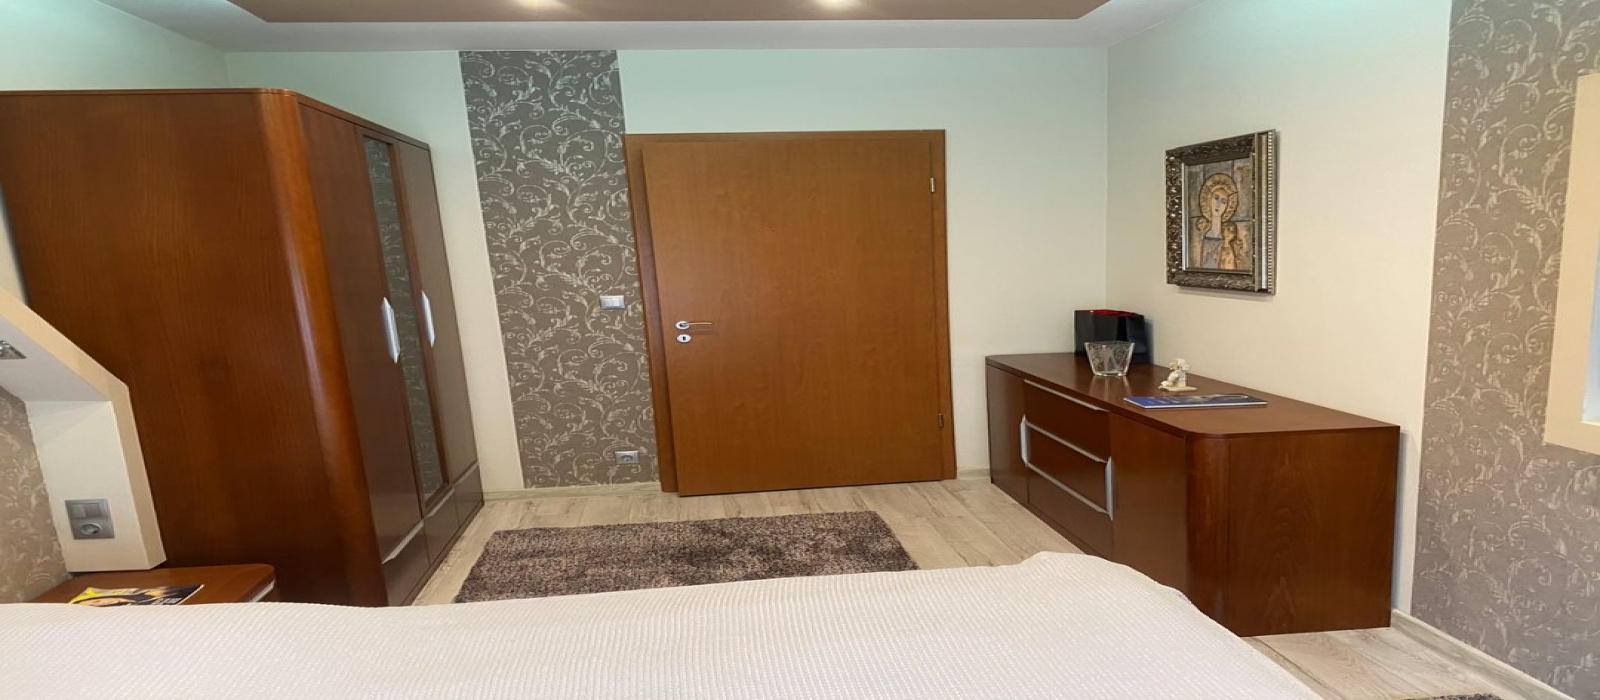 Hungary, 2 Bedrooms Bedrooms, ,2 BathroomsBathrooms,Apartment,For sale,1351